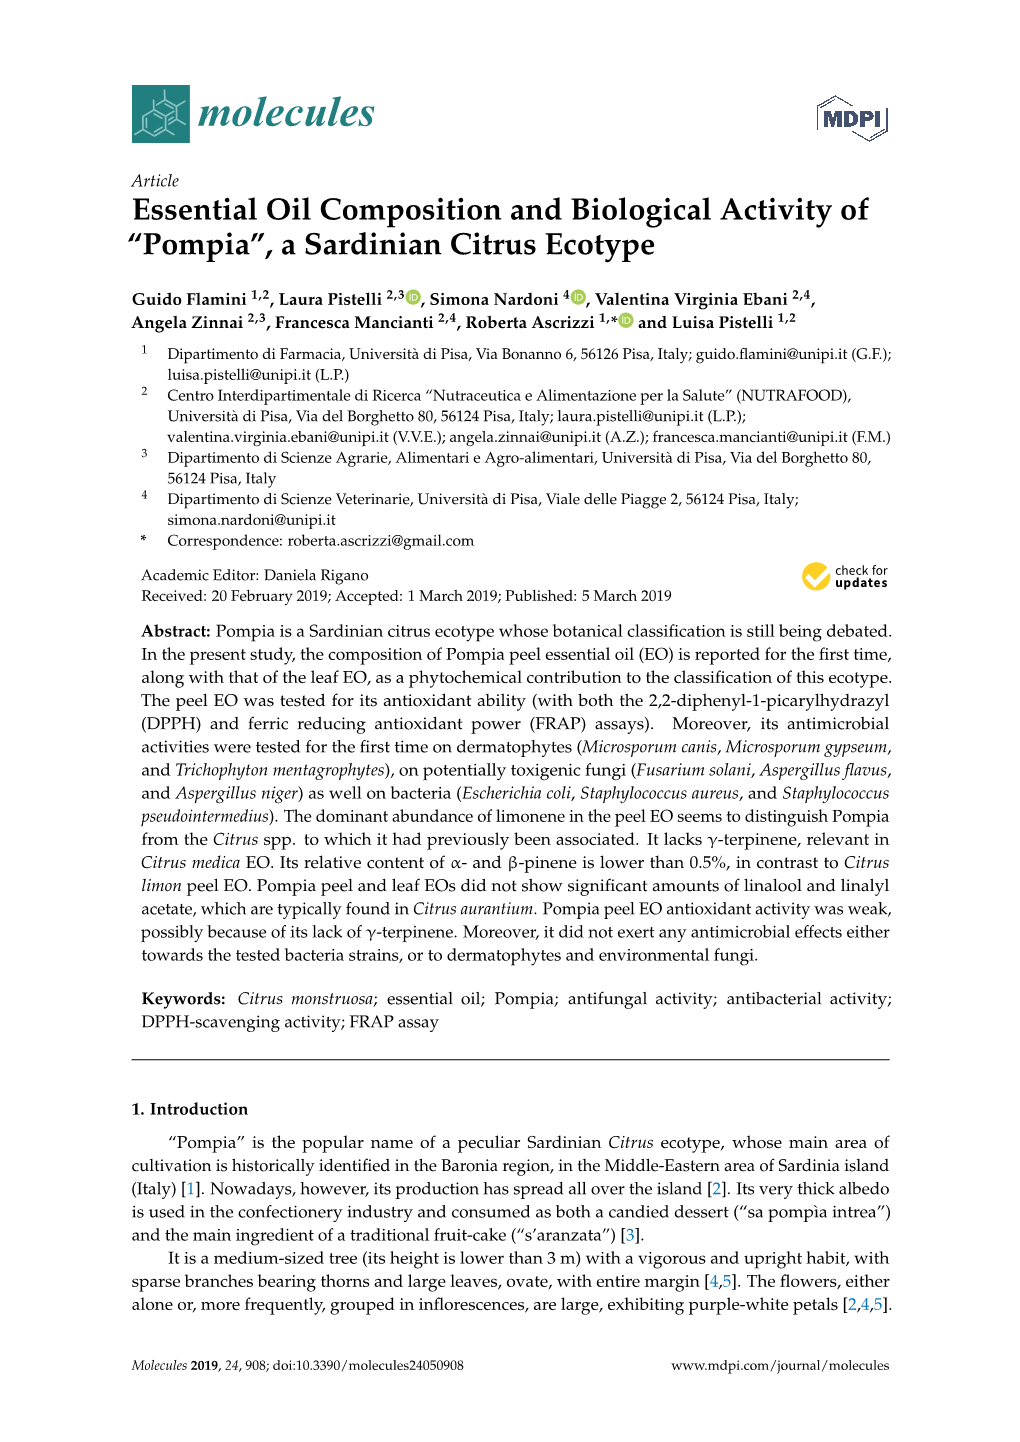 Essential Oil Composition and Biological Activity of “Pompia”, a Sardinian Citrus Ecotype